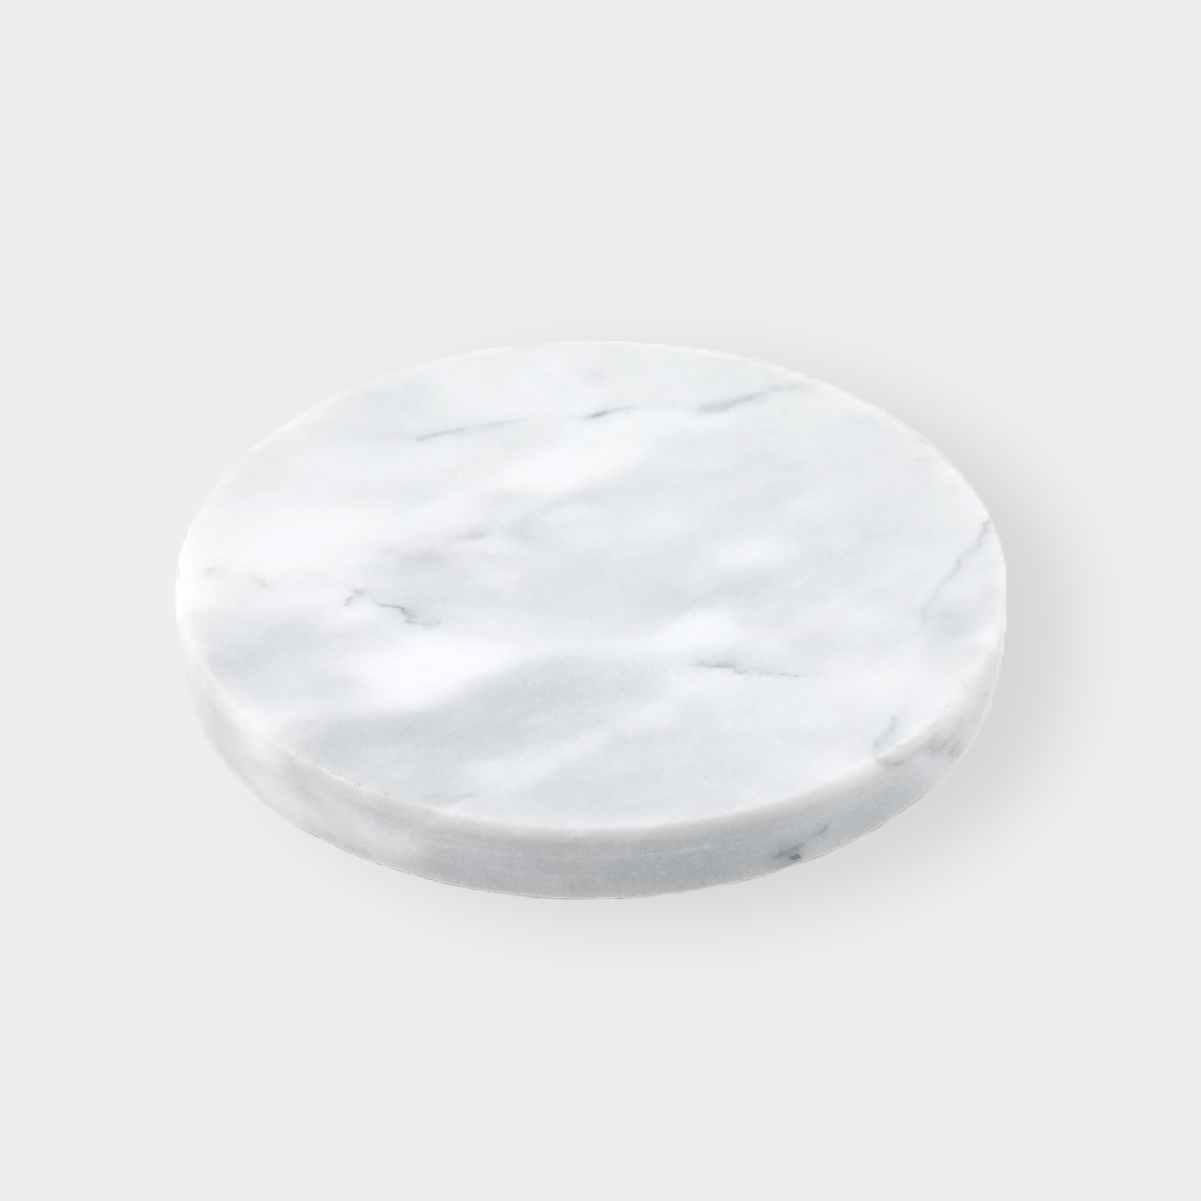 norsuHOME Candle Holders norsuHOME Round Marble Coasters - Set of 4 (7718945456377)